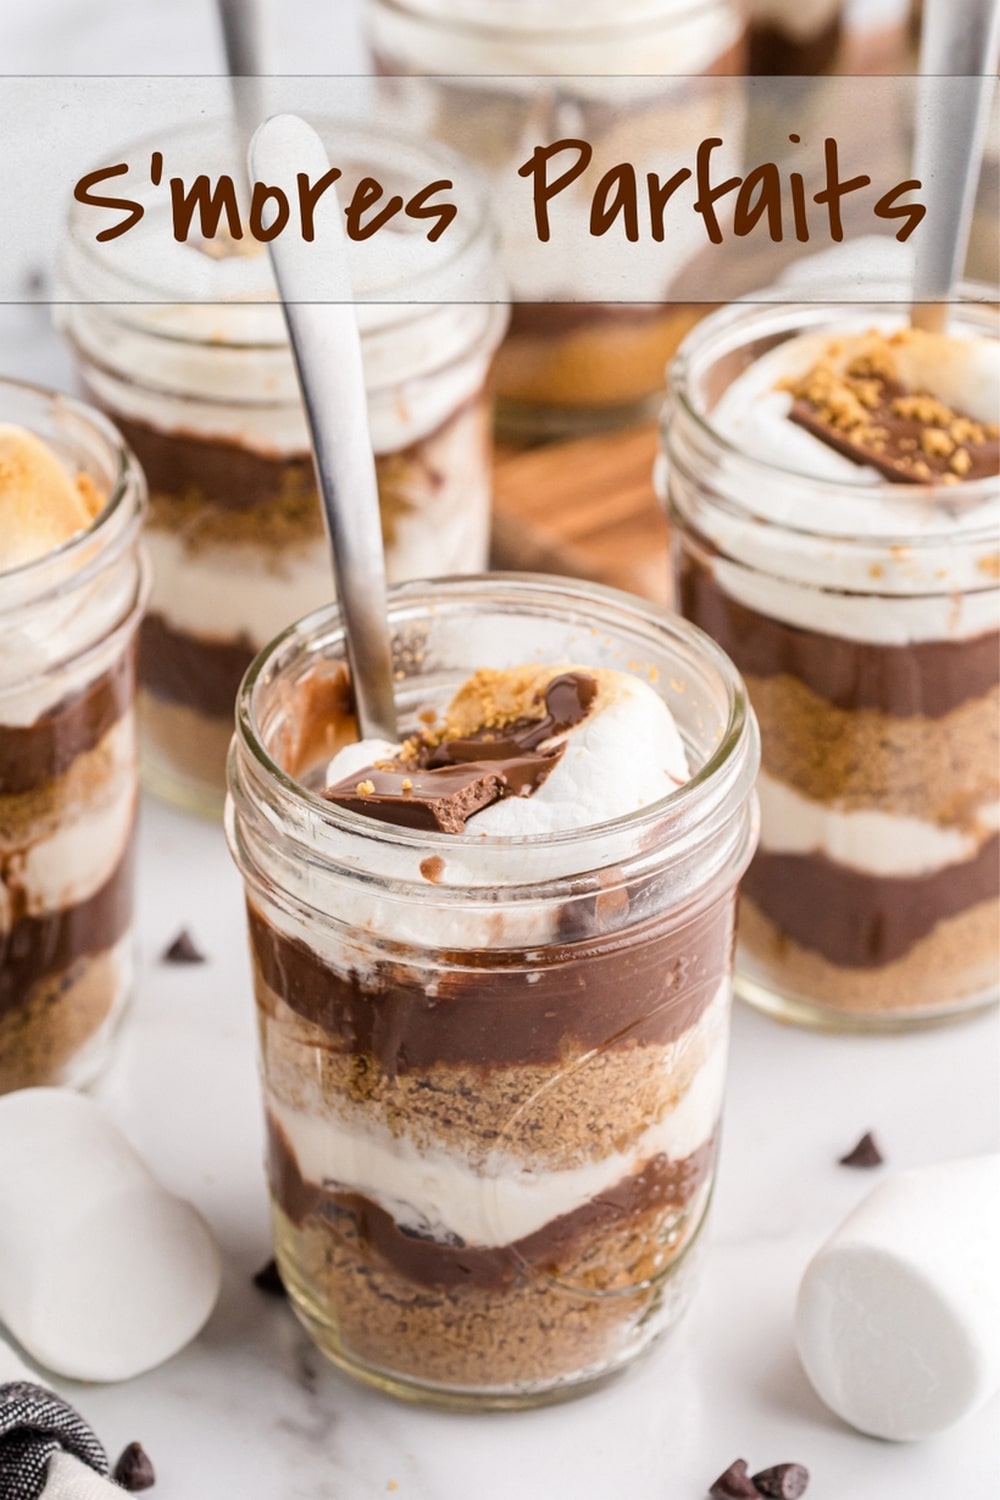 No need to build a campfire to make these layered s'mores parfaits come to life! A close relative to s'mores pudding, but with layers of crunch and a better presentation. via @cmpollak1